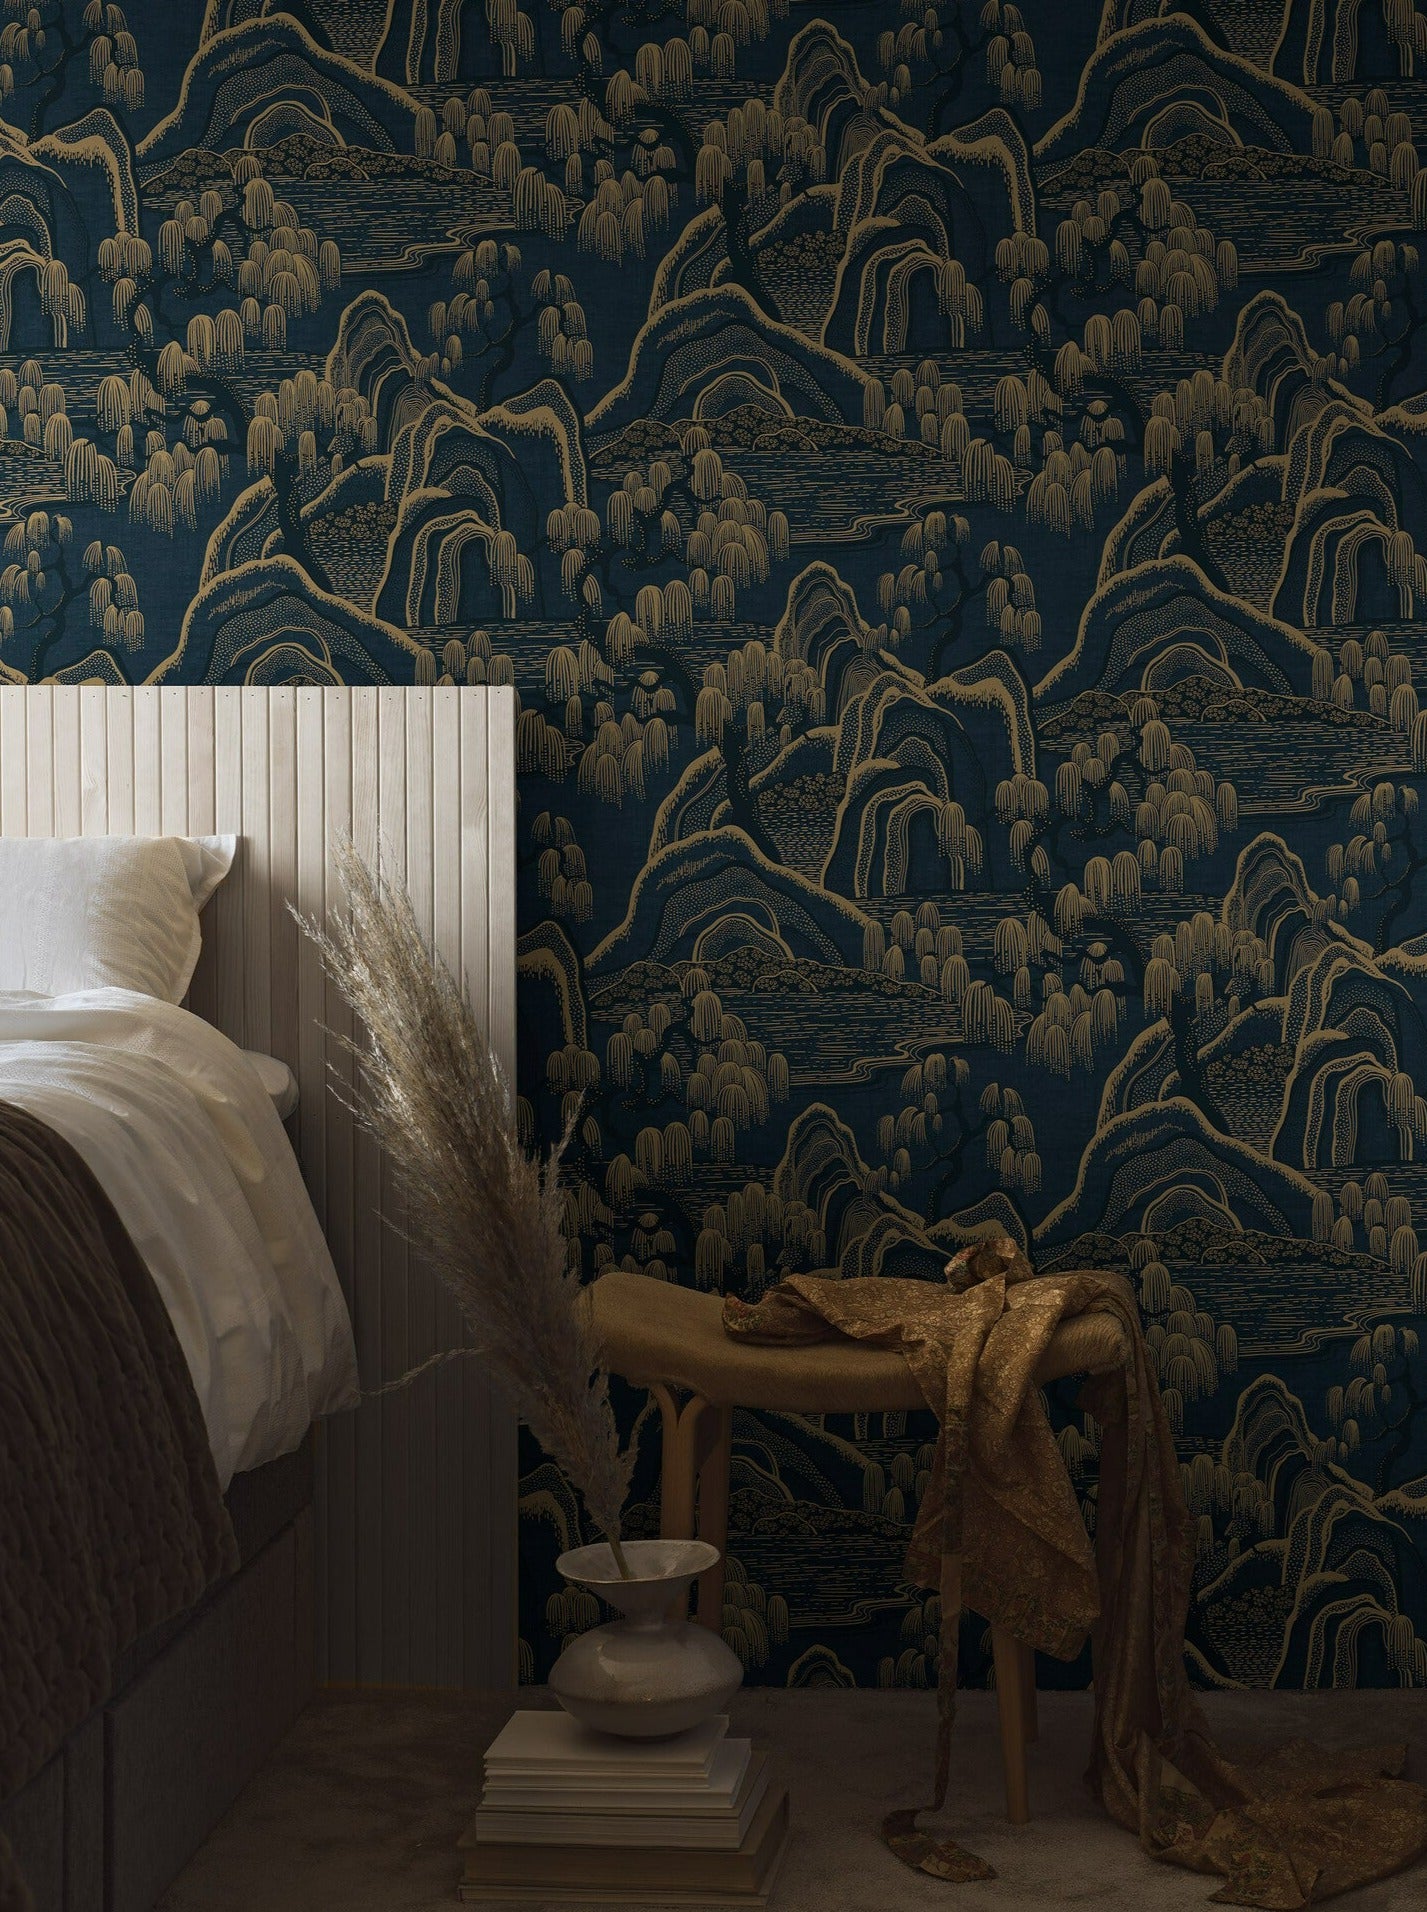 Coloured in shades of blue and dramatic gold detailing, our Indigo Garden wallpaper will add an element of opulence to your interior.